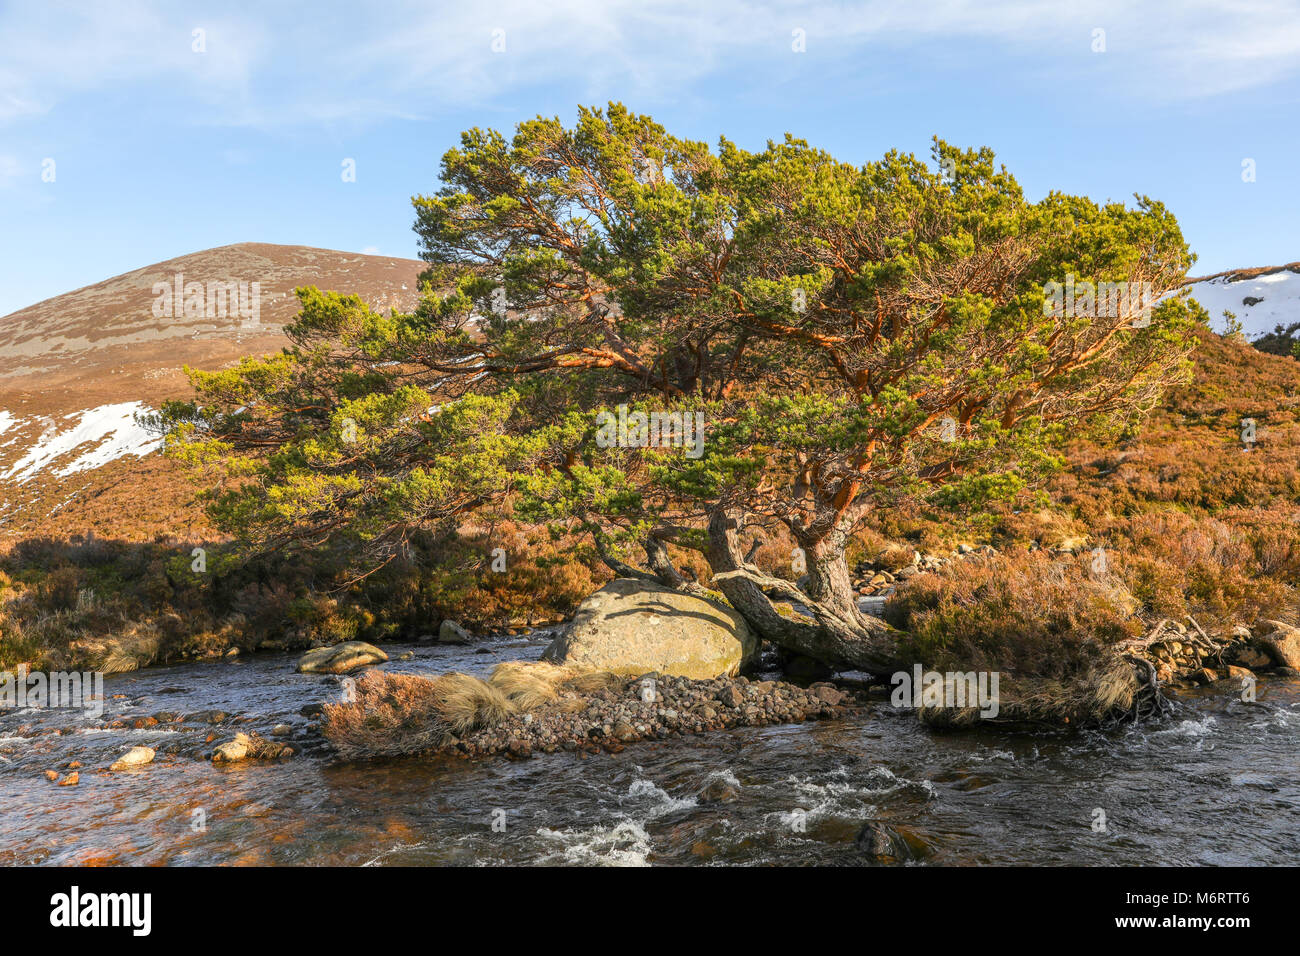 Scots Pine trees (Pinus sylvestris L.) seen at loch Eanaich near Avimore in the Scottish Highlands, Scotland, UK. Stock Photo